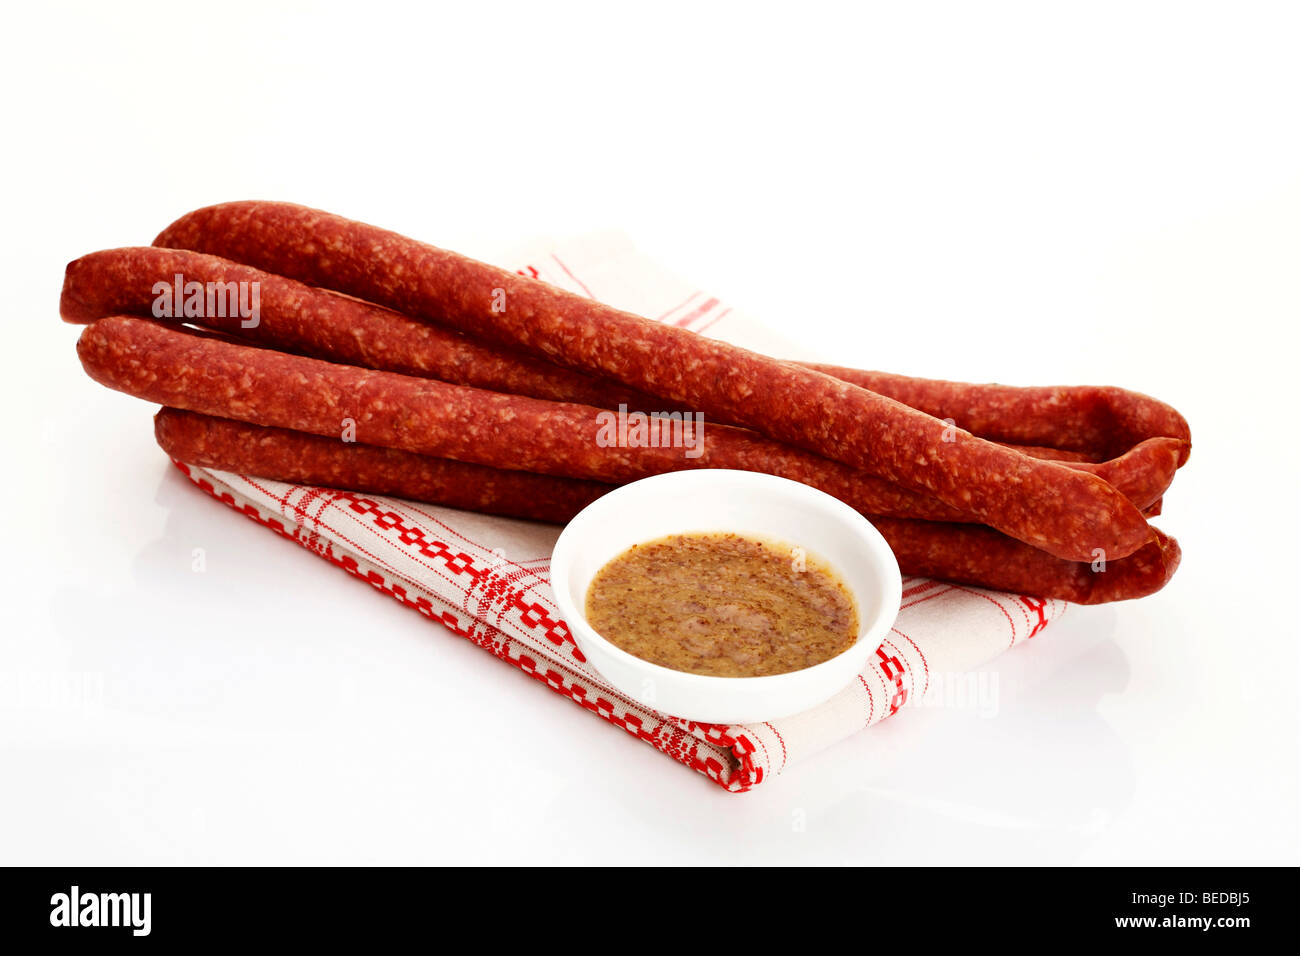 Ham Mettwurst sausages with sweet mustard Stock Photo